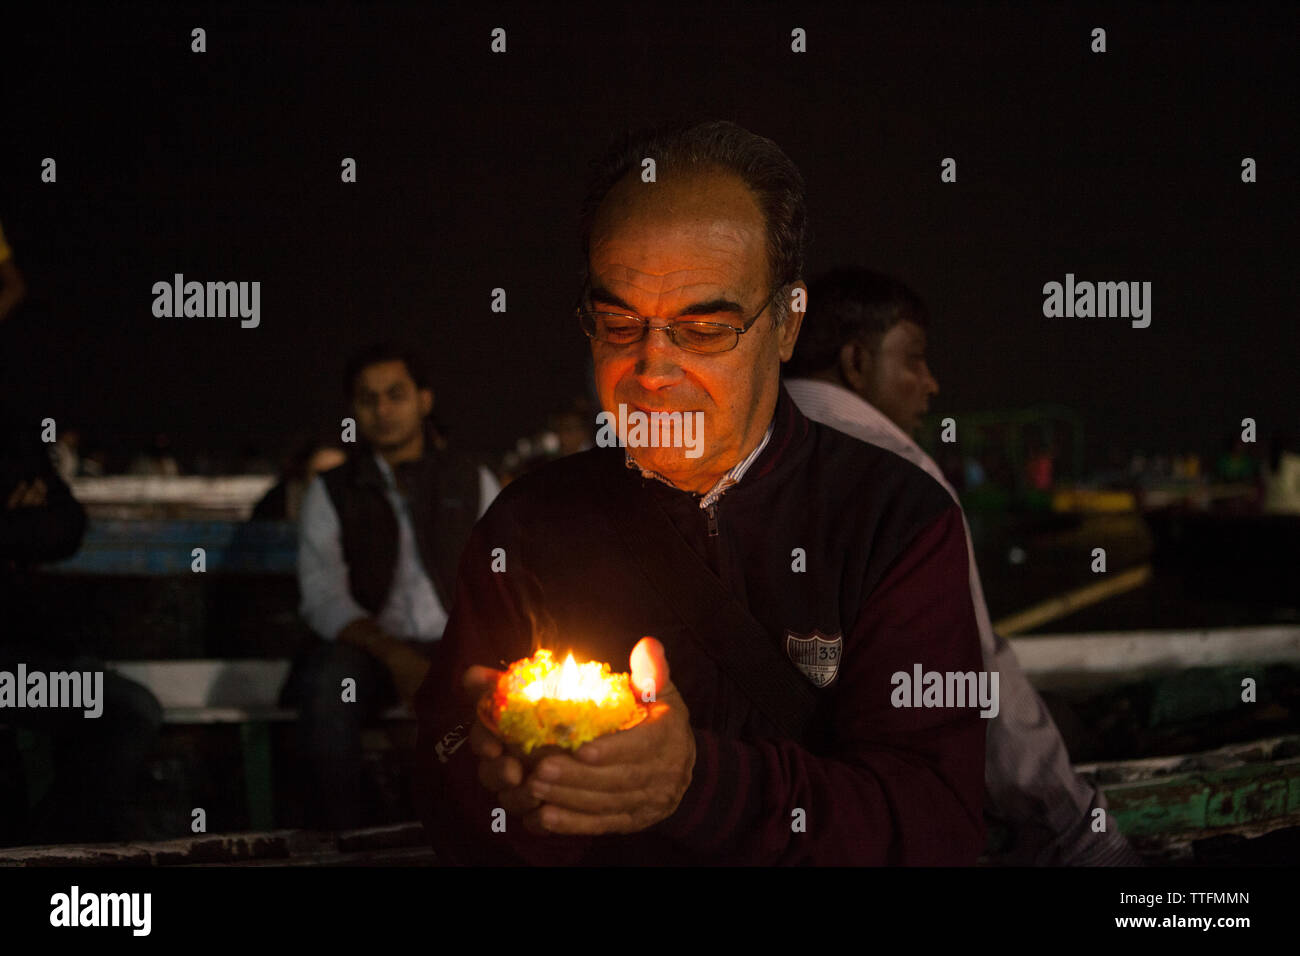 Caucasian 60 years old man at night holding a candle in India Stock Photo